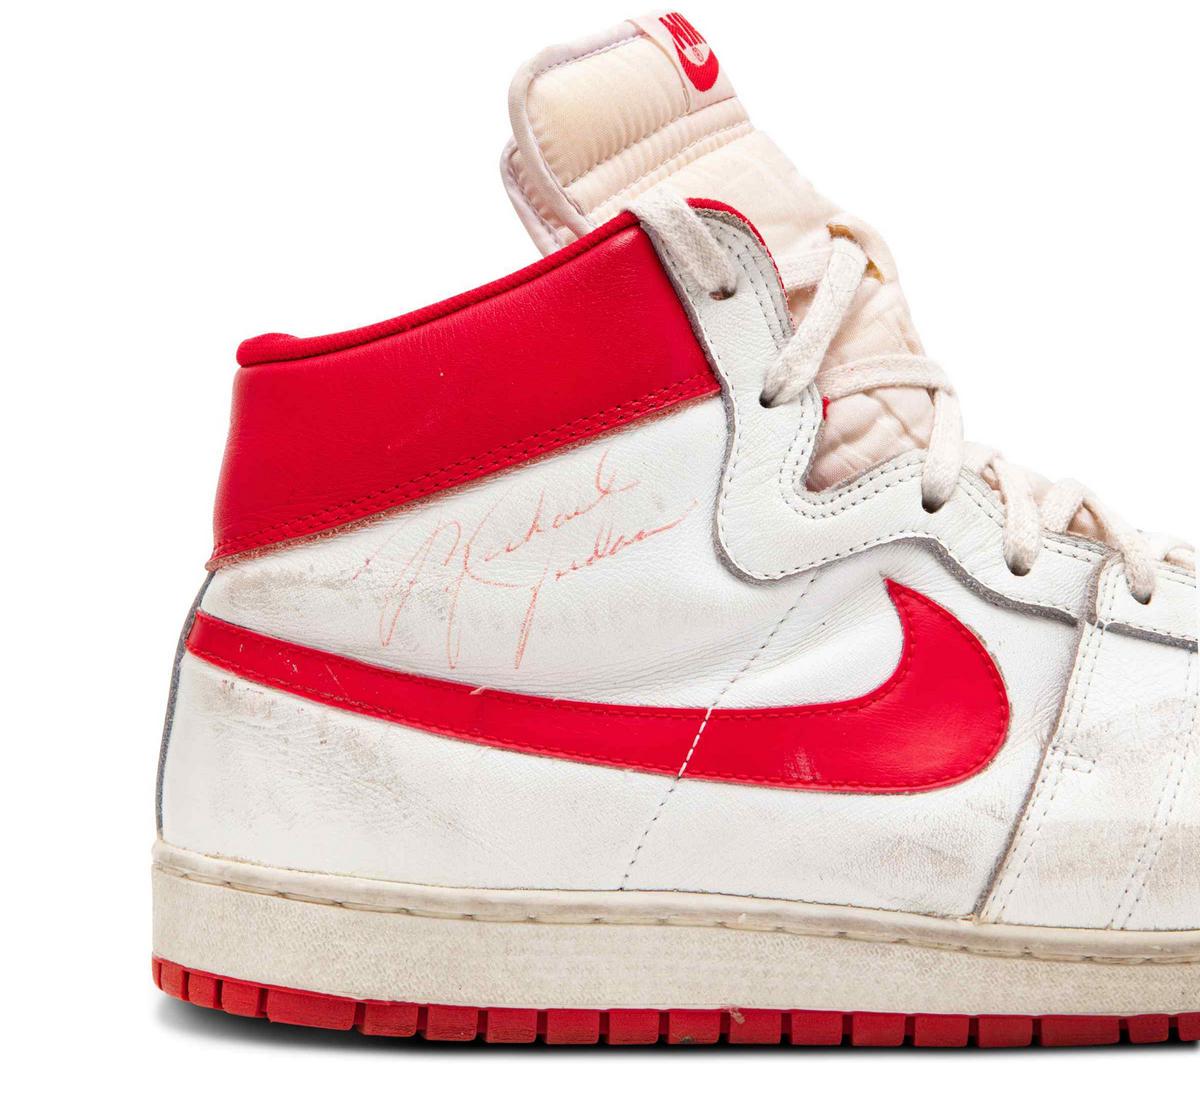 Signed Nike Air Jordan 1s become most expensive sneakers sold at auction